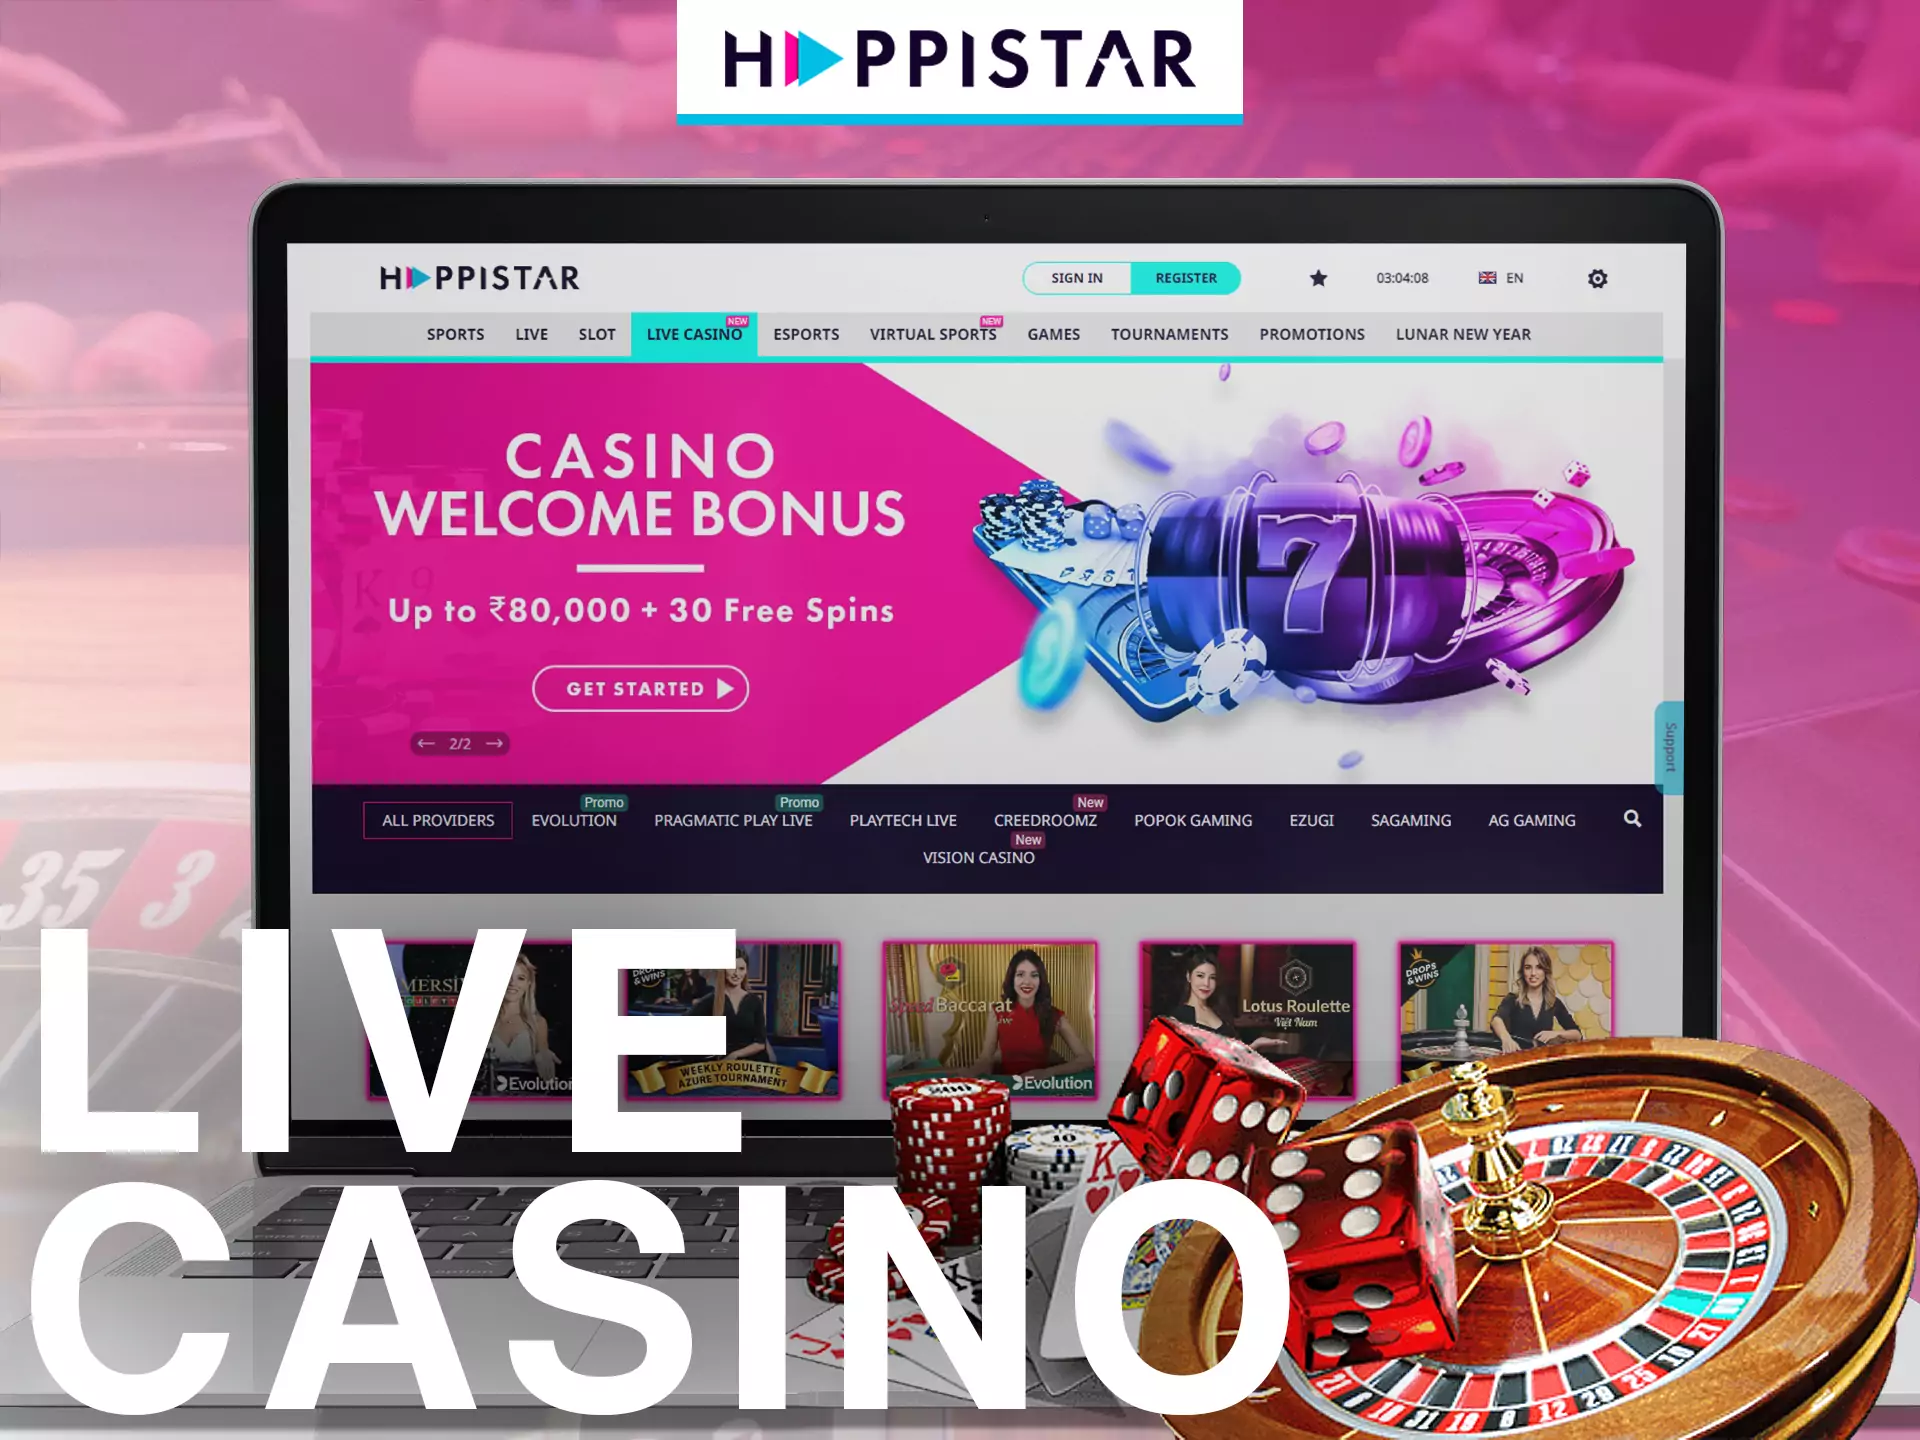 In the Happistar casino, you can play games with live dealers.